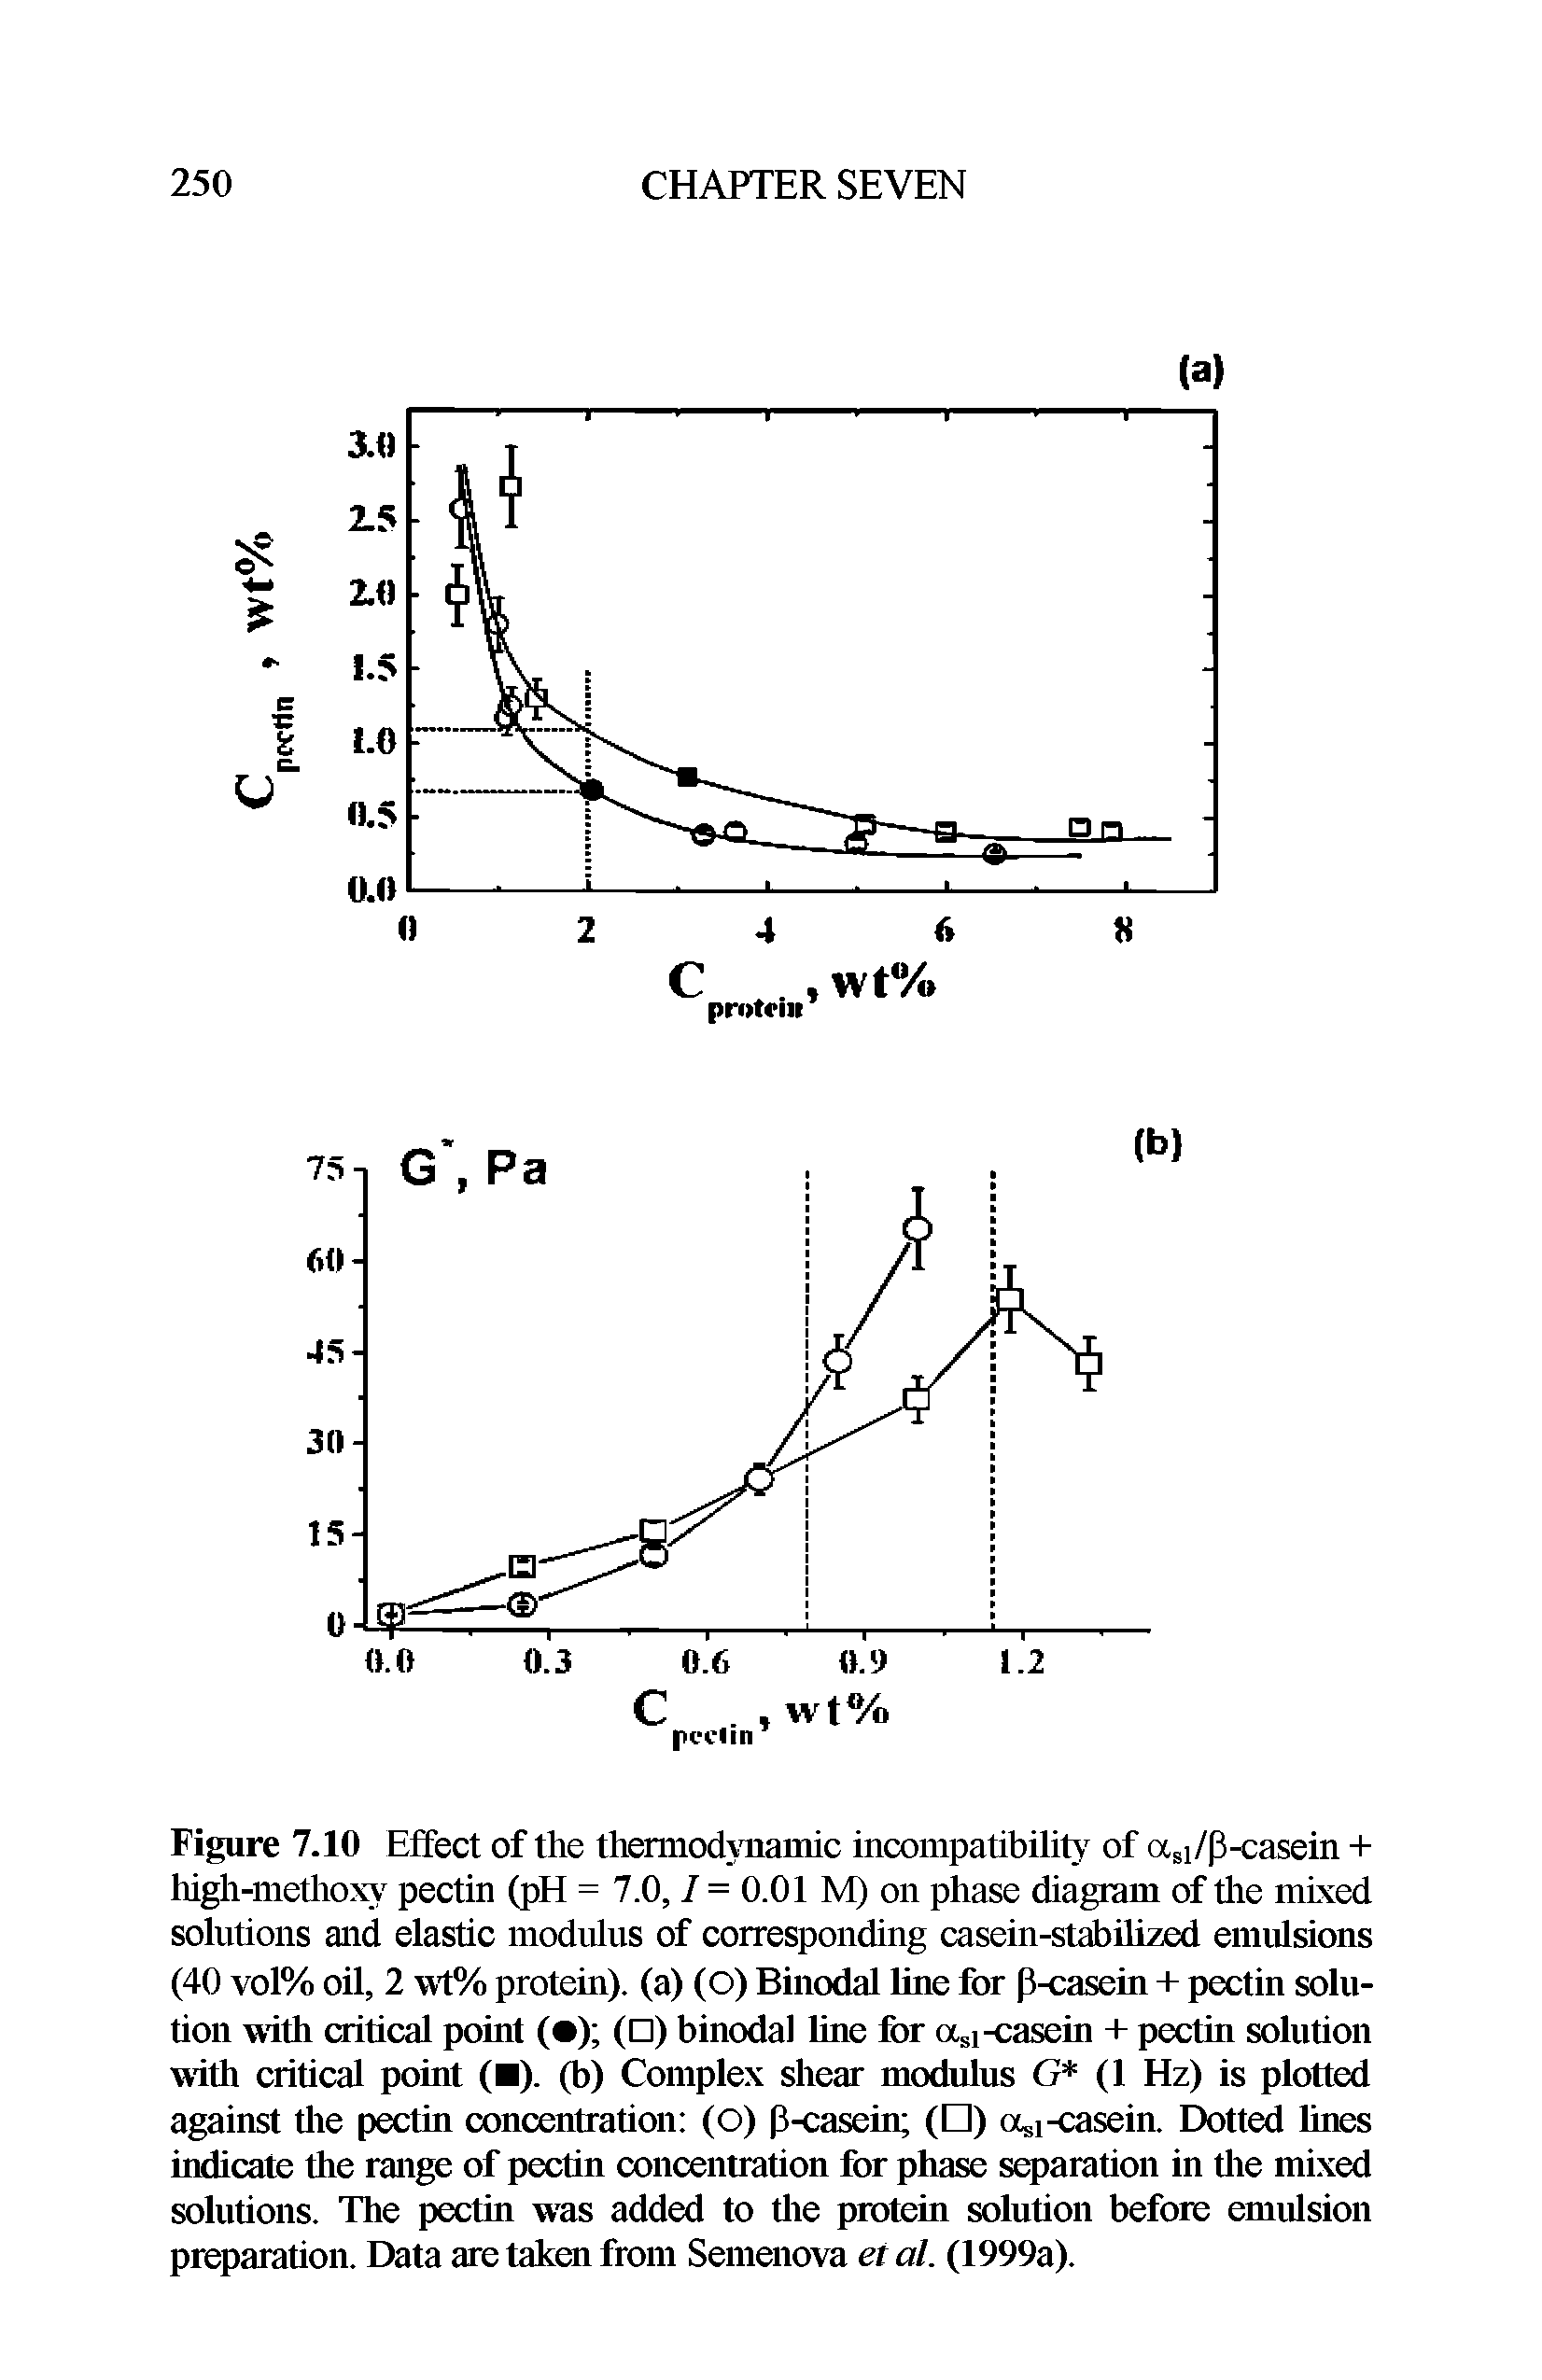 Figure 7.10 Effect of the thermodynamic incompatibility of otsi/p-casein + high-methoxy pectin (pH = 7.0, / = 0.01 M) on phase diagram of the mixed solutions and elastic modulus of corresponding casein-stabilized emulsions (40 vol% oil, 2 wt% protein), (a) (O) Binodal line for p-casein + pectin solution with critical point ( ) ( ) binodal line for asi-casein + pectin solution with critical point ( ). (b) Complex shear modulus G (1 Hz) is plotted against the pectin concentration (O) p-casein ( ) o i -casein. Dotted lines indicate the range of pectin concentration for phase separation in the mixed solutions. The pectin was added to the protein solution before emulsion preparation. Data are taken front Semenova et al. (1999a).